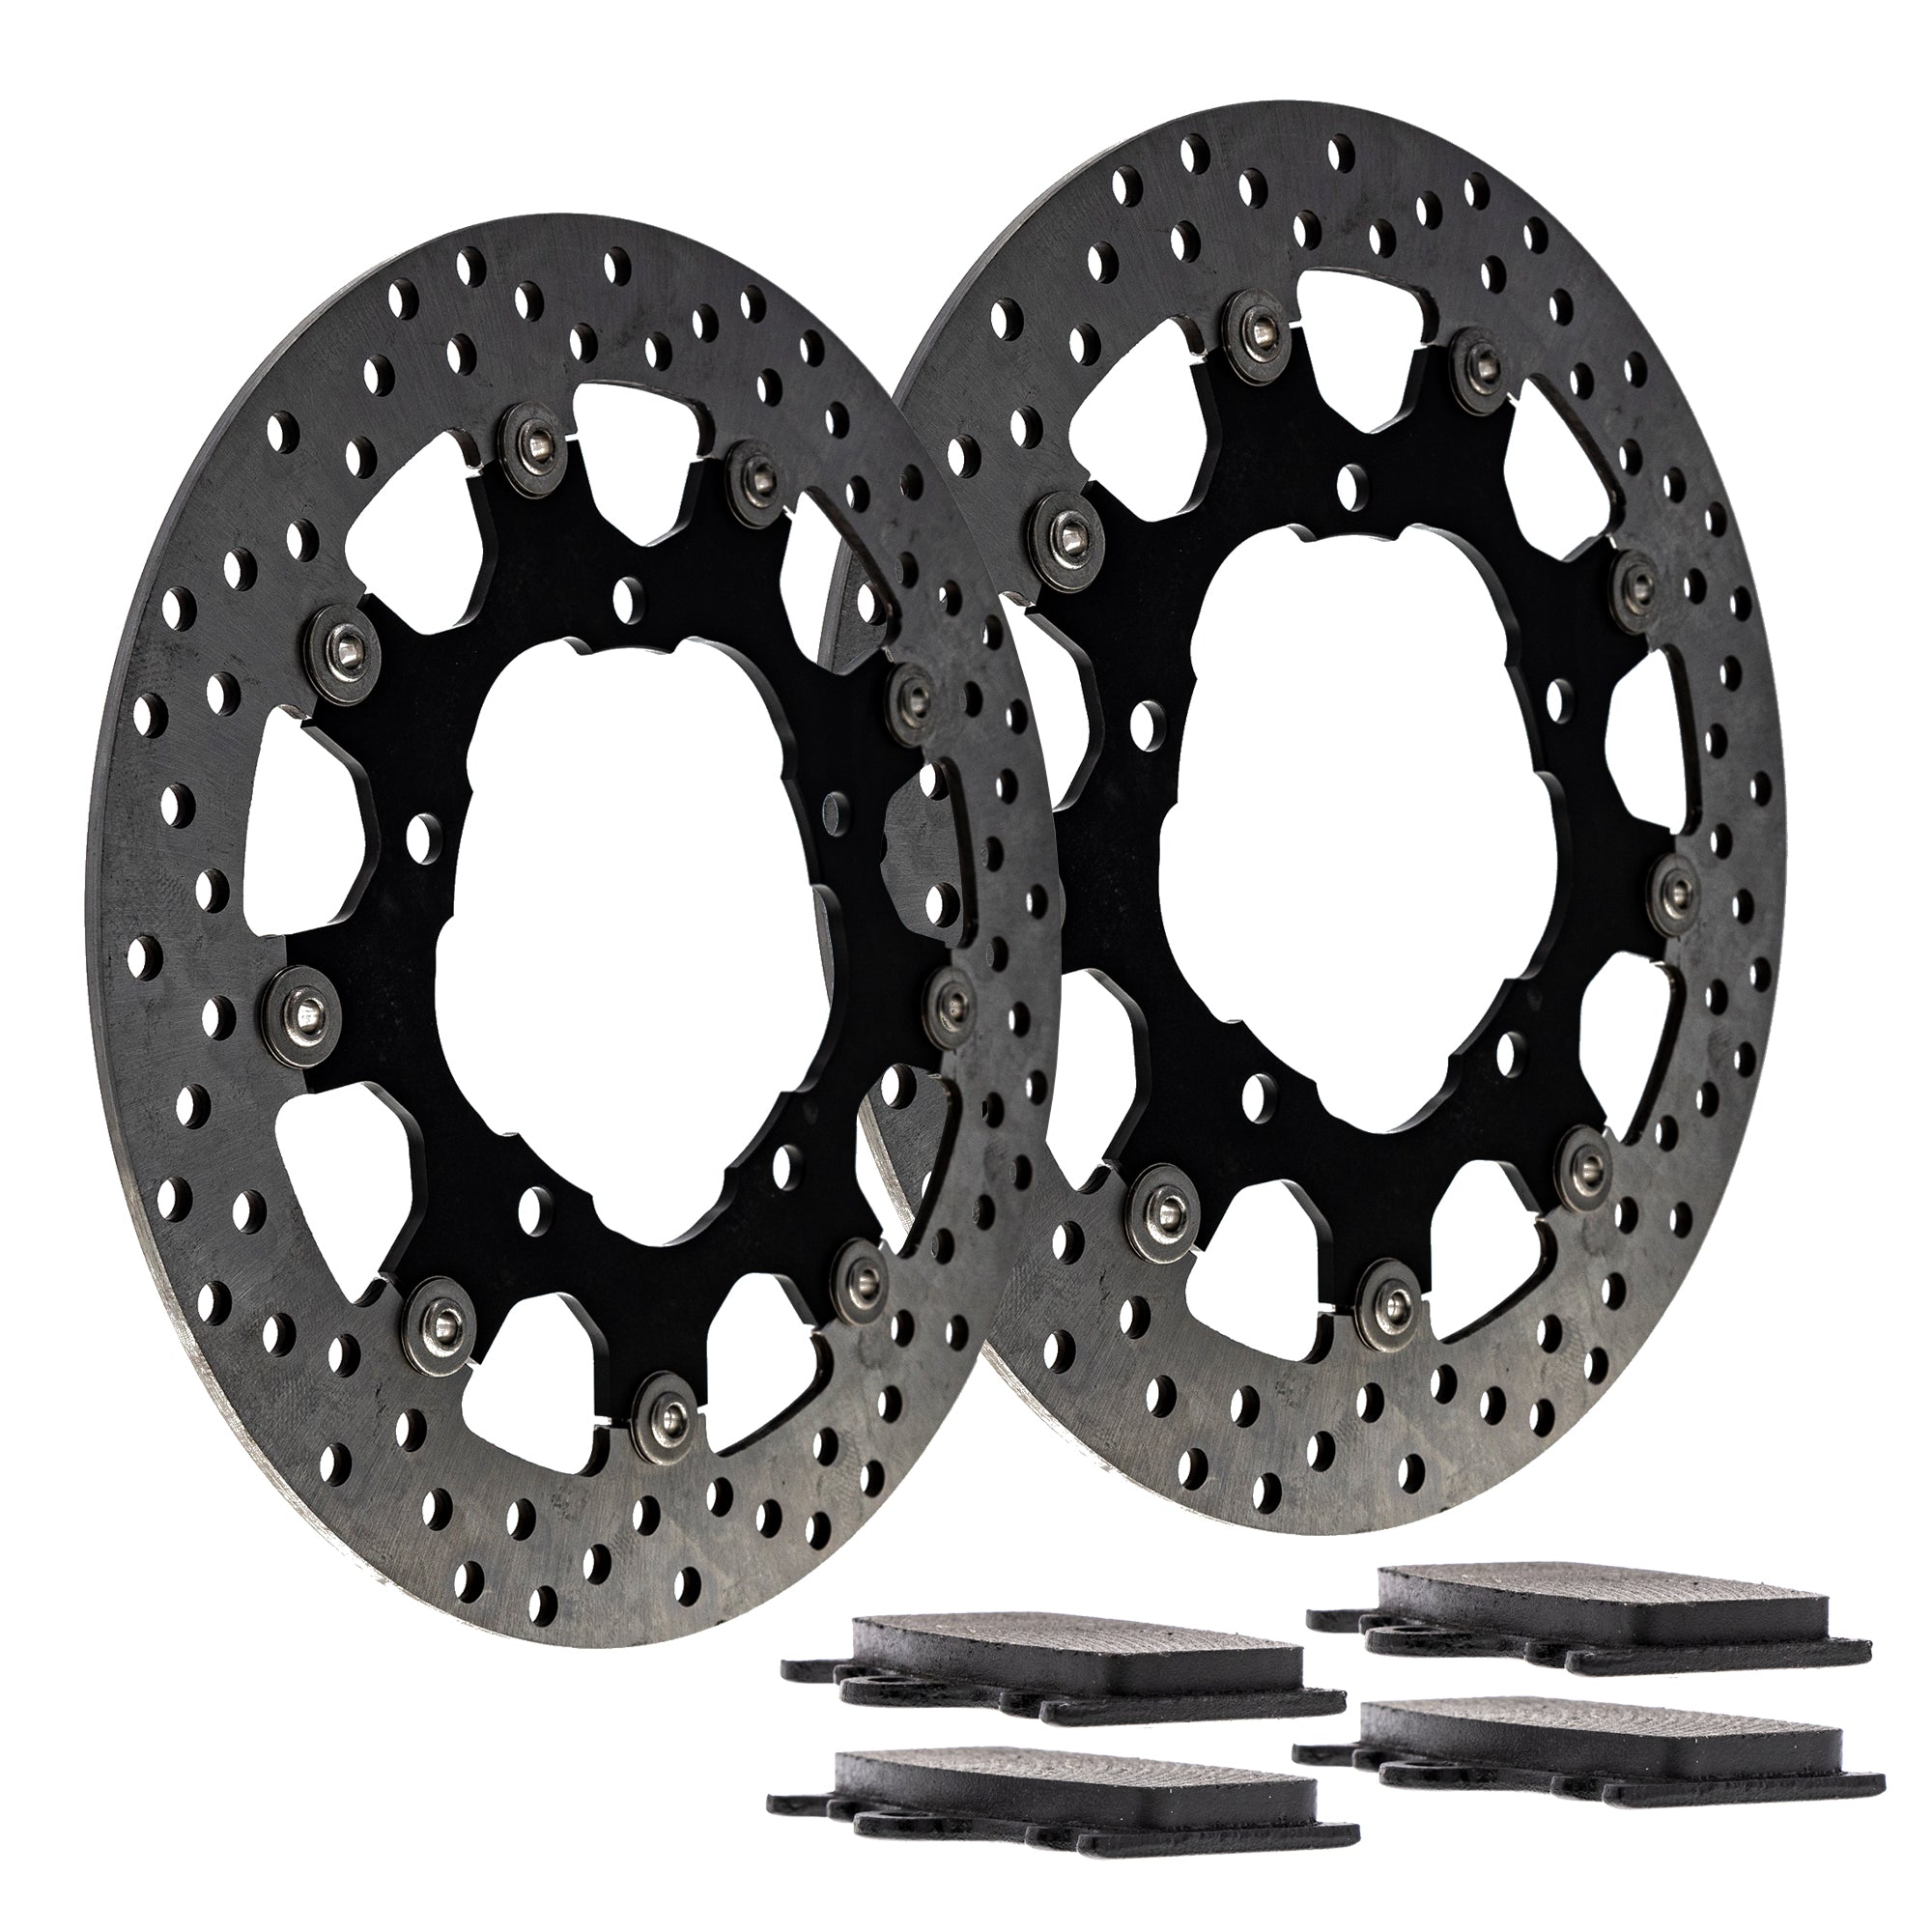 Single Pad and Rotor Set for zOTHER Triumph 43082-0016 43082-0153 43082-0052 59101-35810 NICHE MK1007064